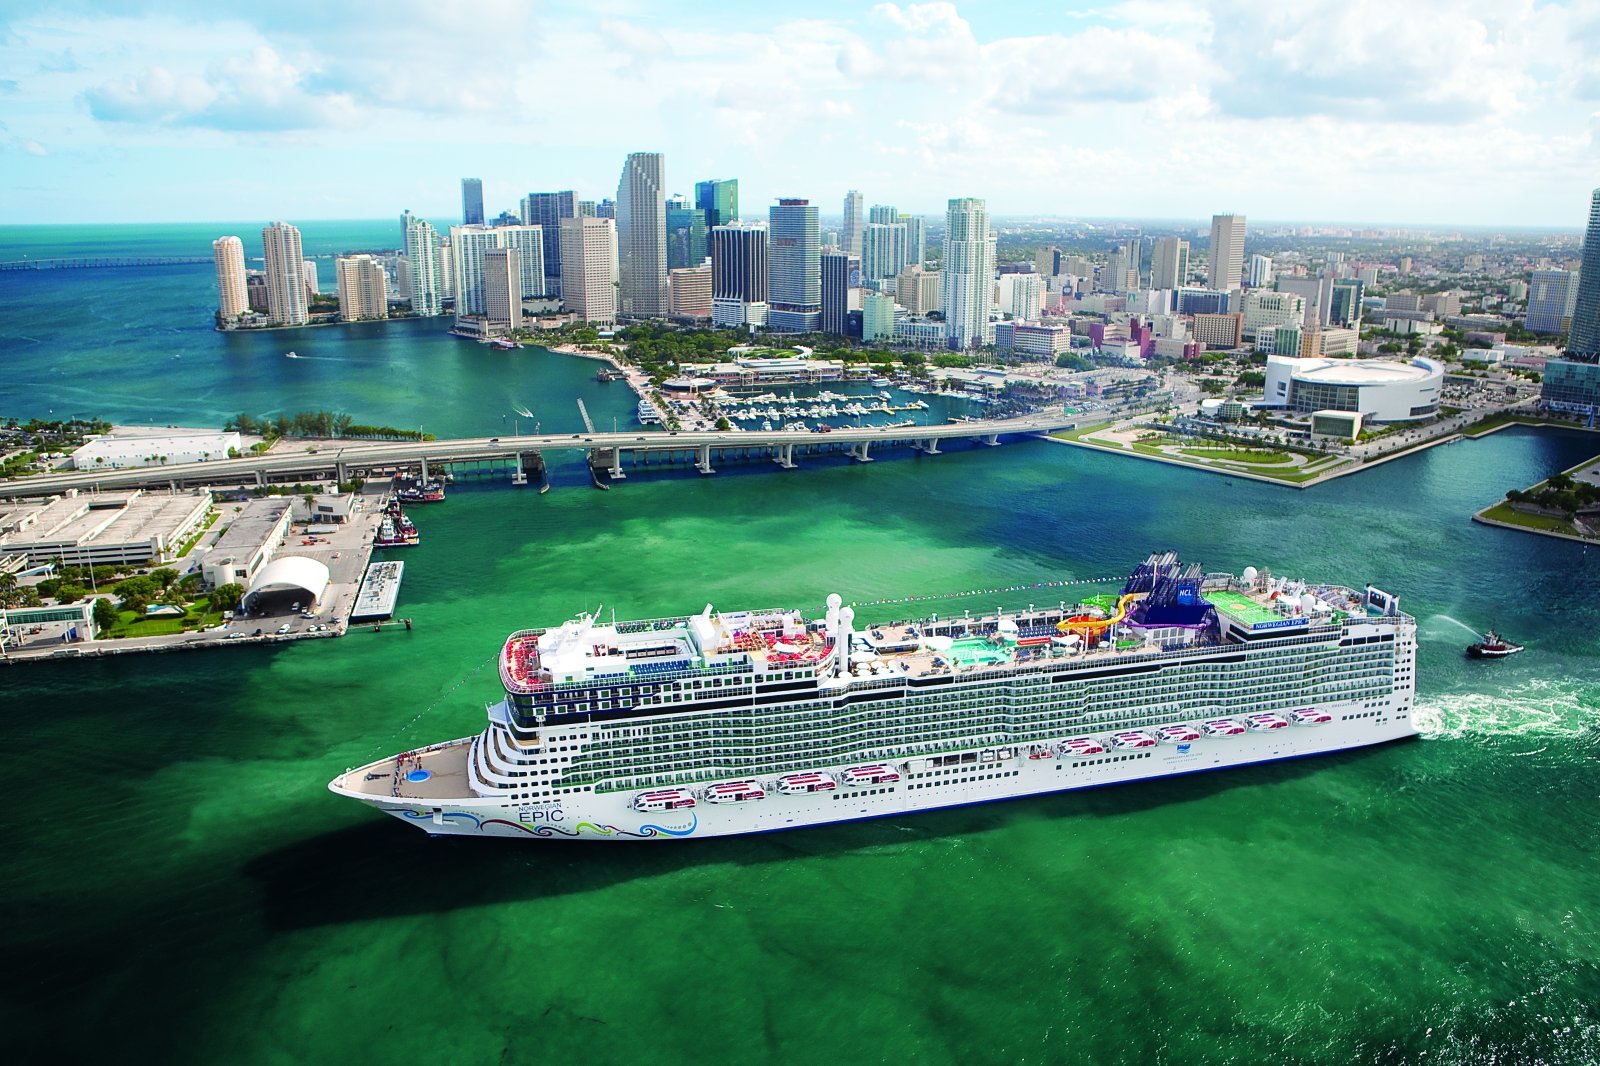 Norwegian Cruise Line warns it could move cruise ships from Florida due to vaccine passport ban | Royal Caribbean Blog